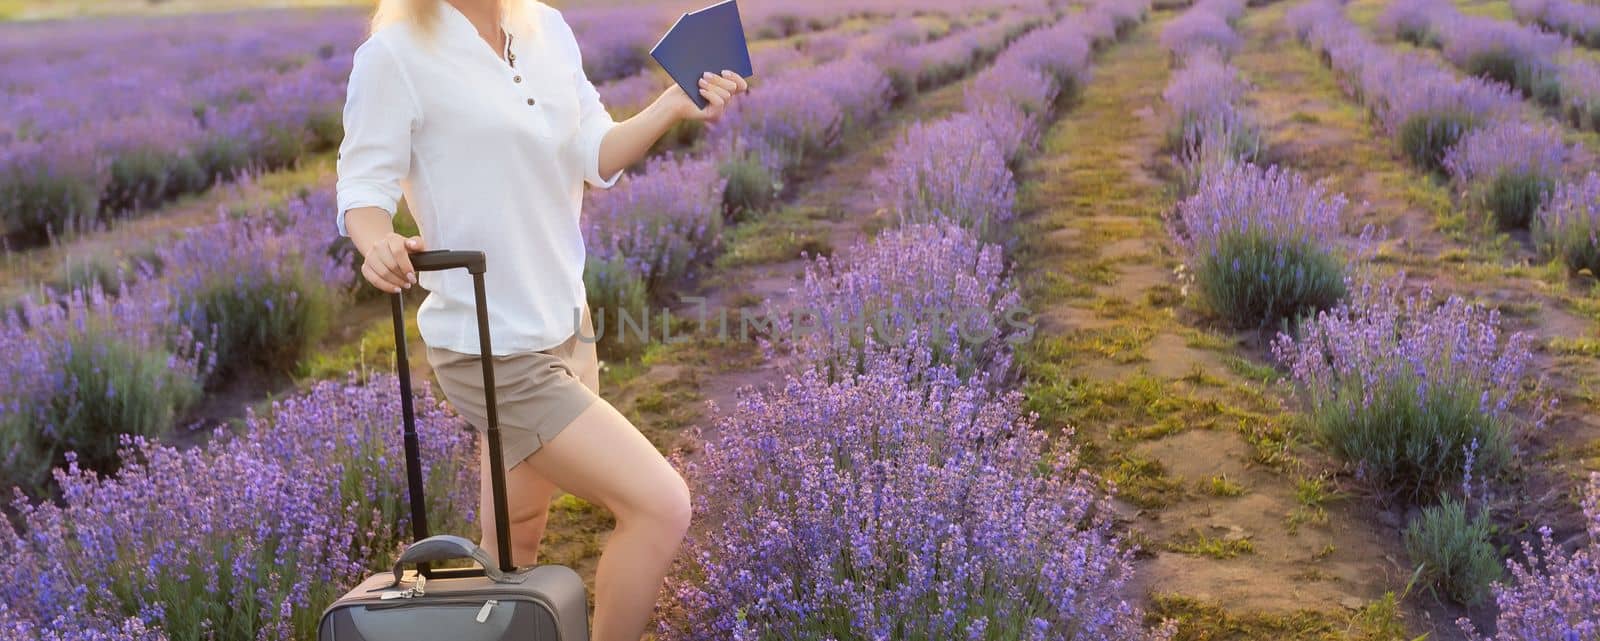 woman with suitcase and passport in lavender field.